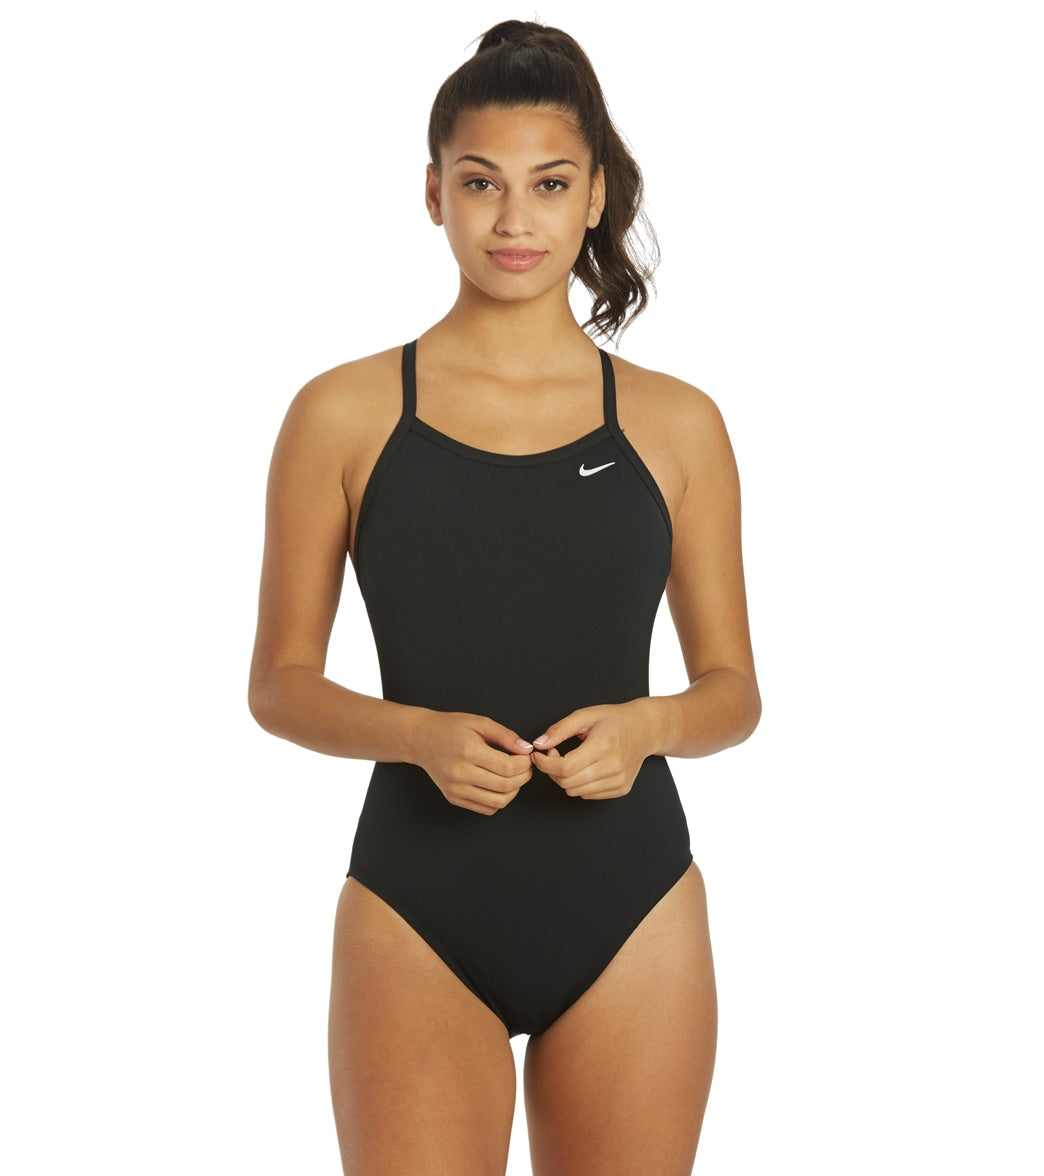 Nike Women's Solid Poly Racer Back One Swimsuit at SwimOutlet.com